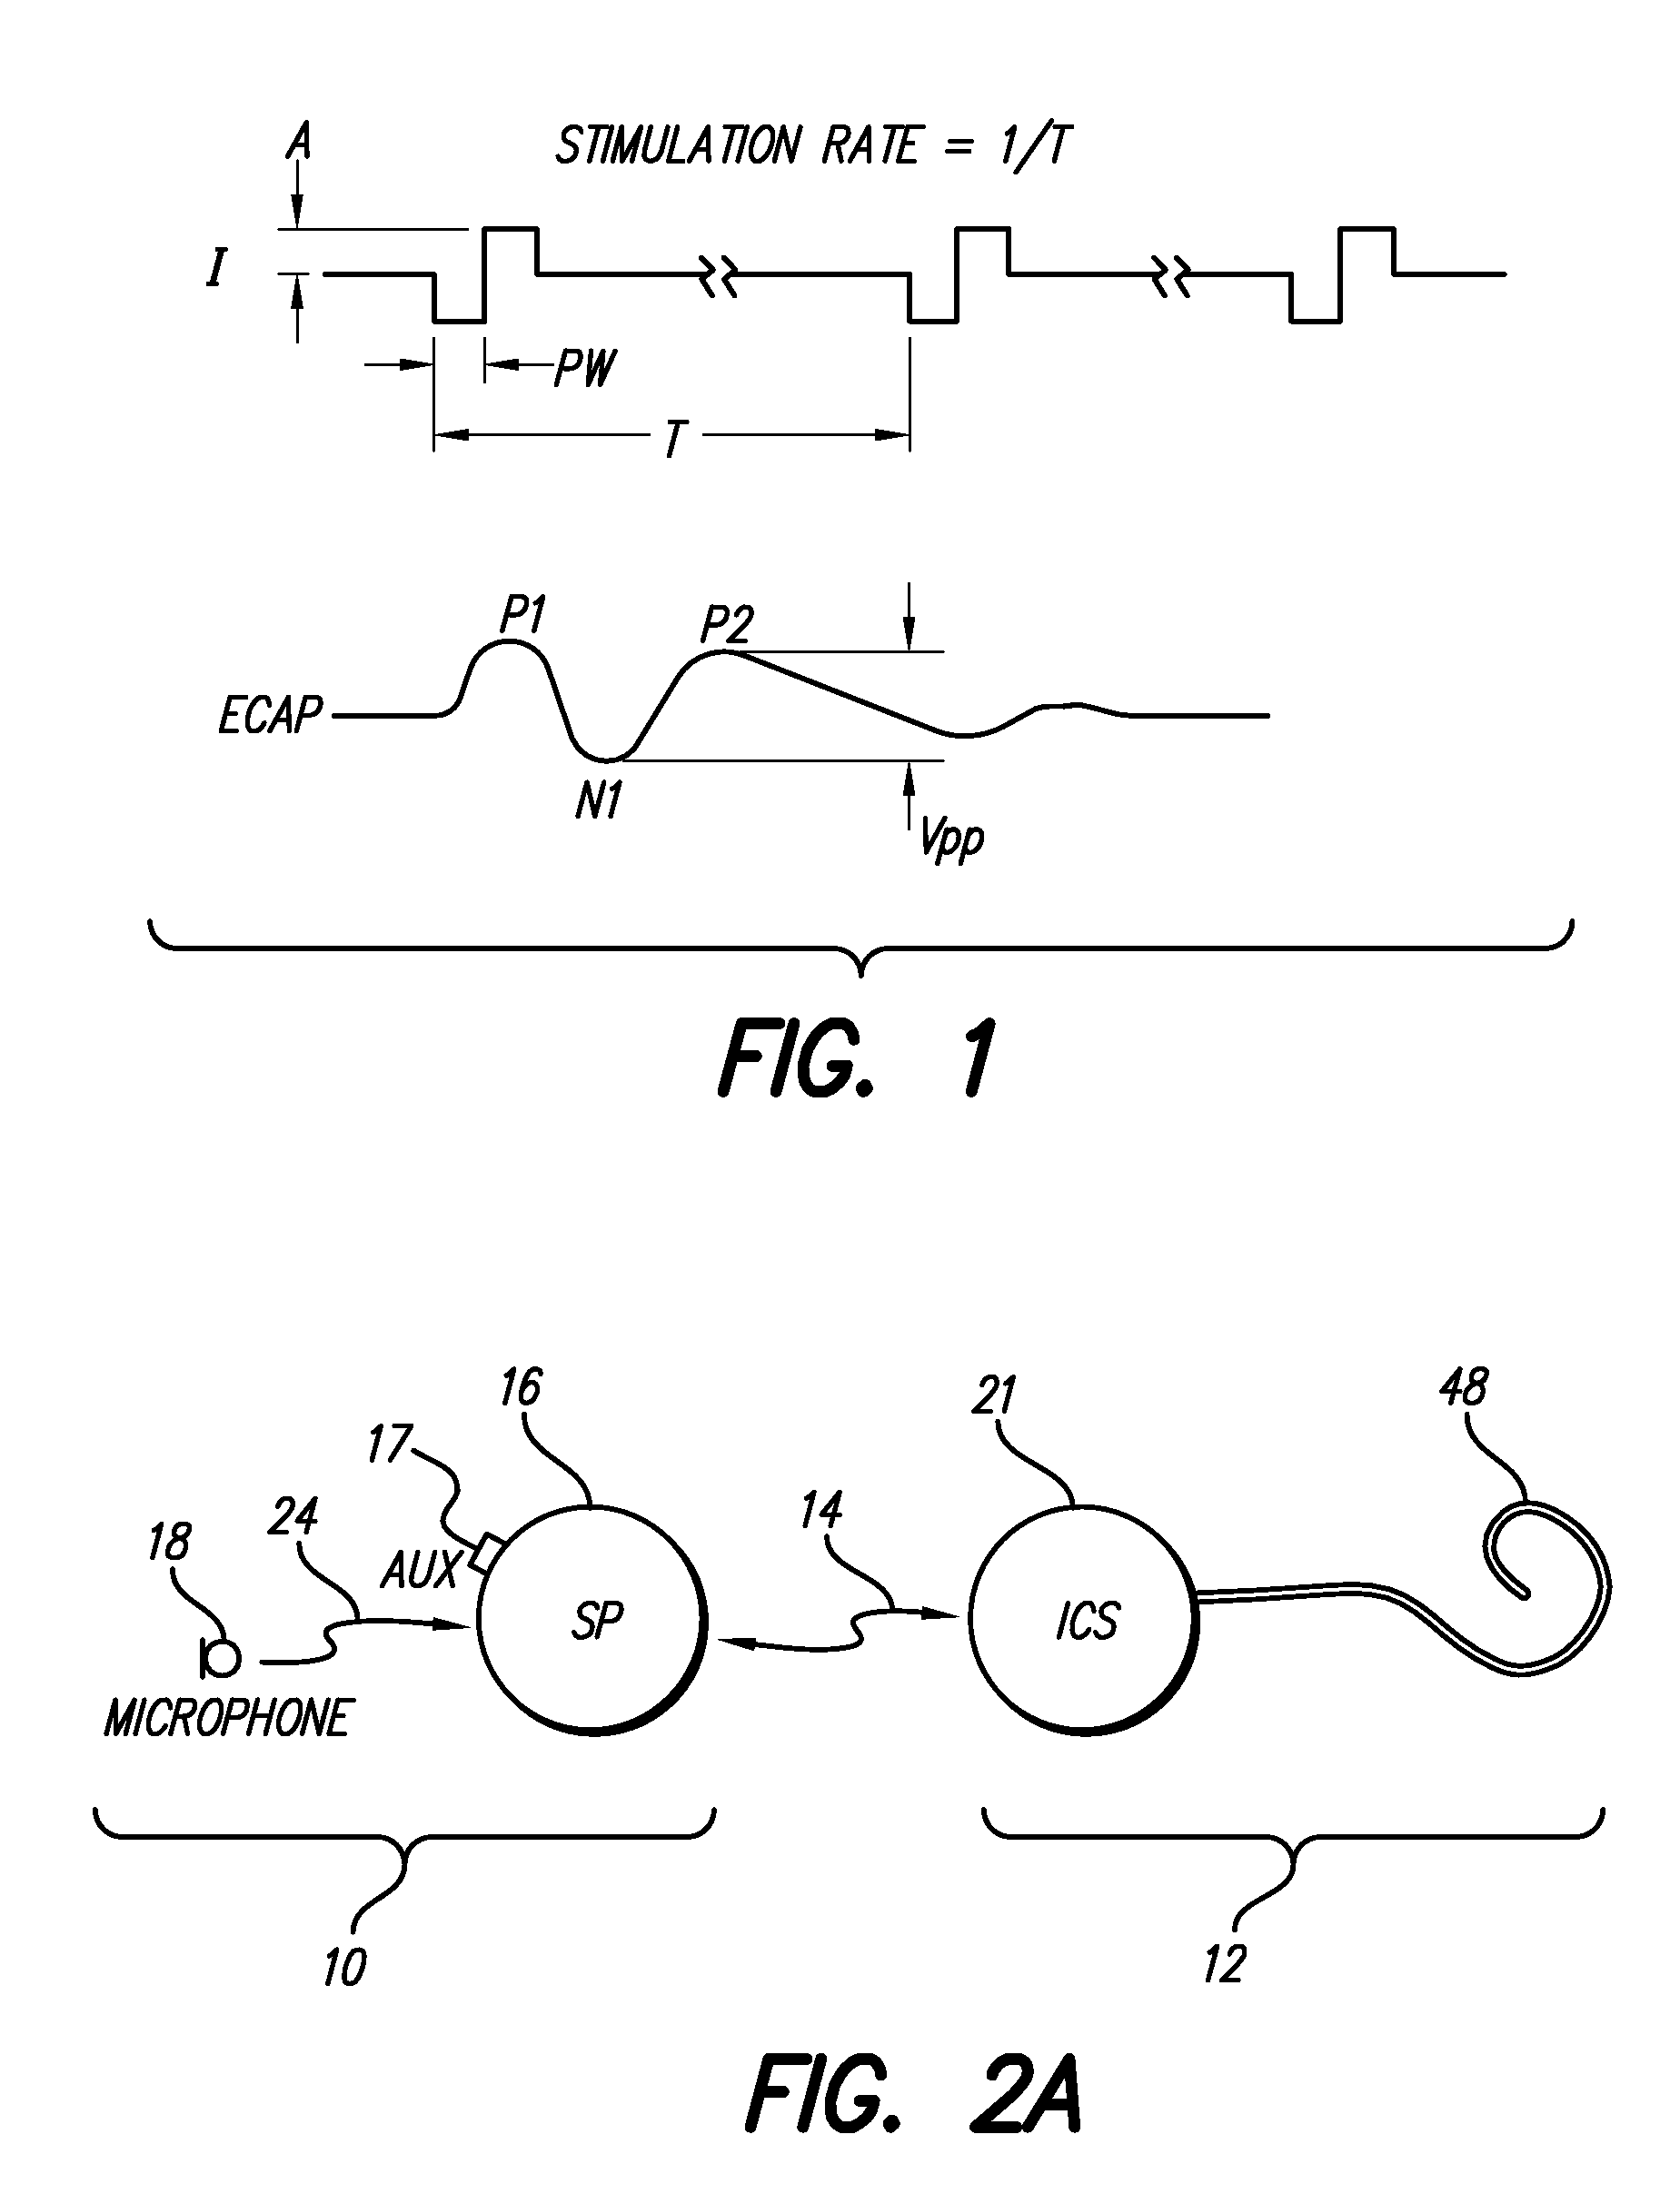 System for generating a cochlear implant program using multi-electrode stimulation to elicit the electrically-evoked compound action potential